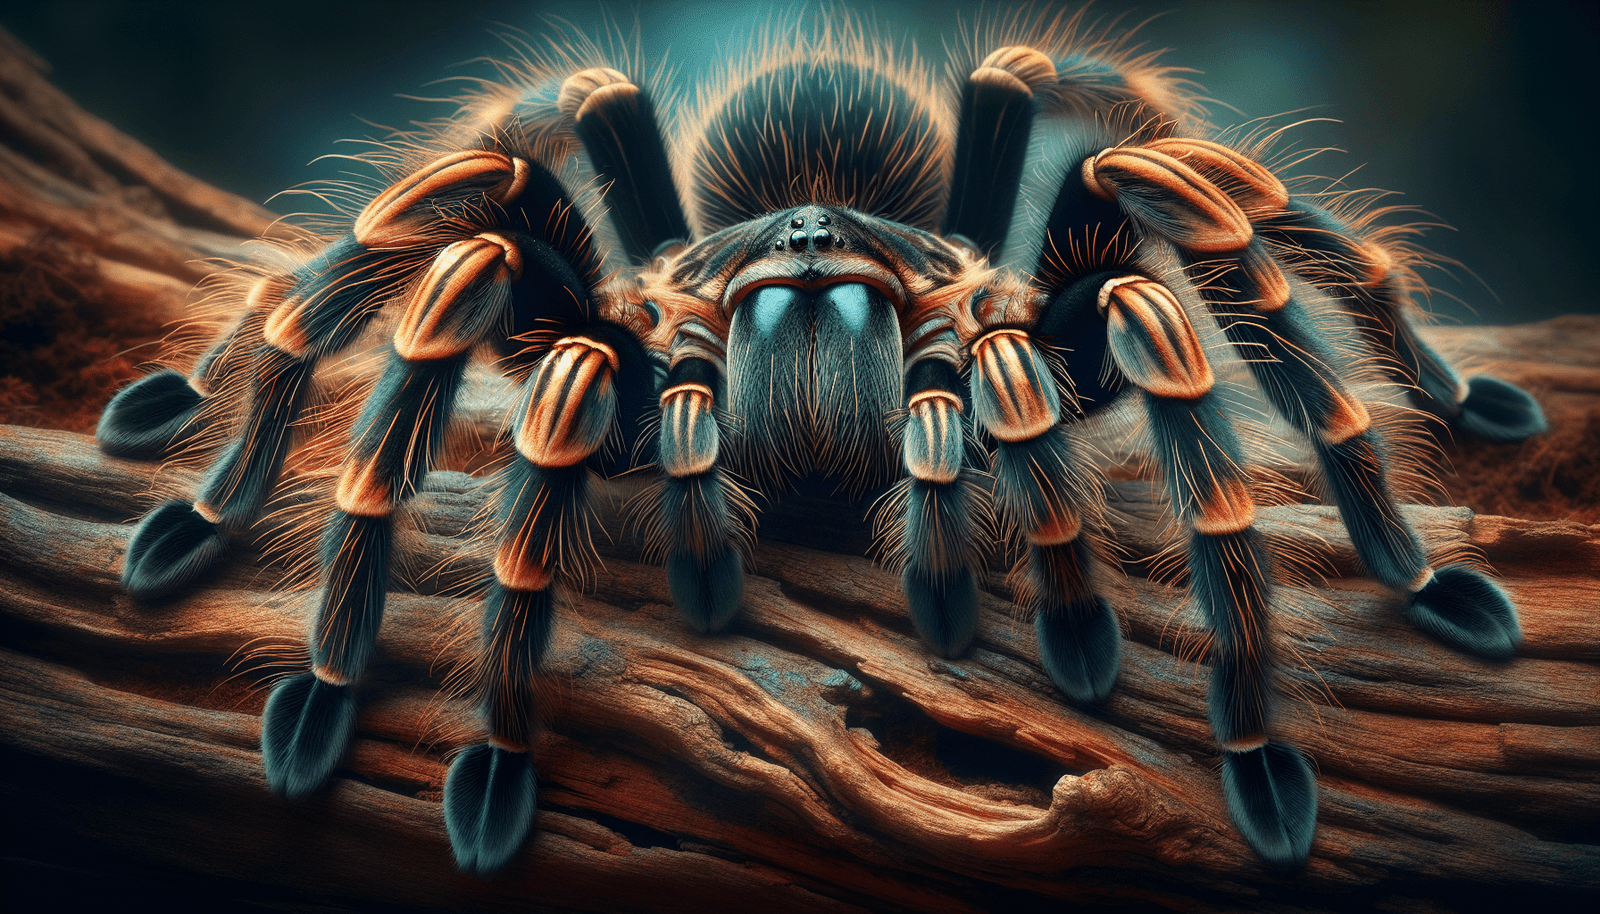 Can Tarantulas Be Affected By Threats From Large Predatory Crustaceans?